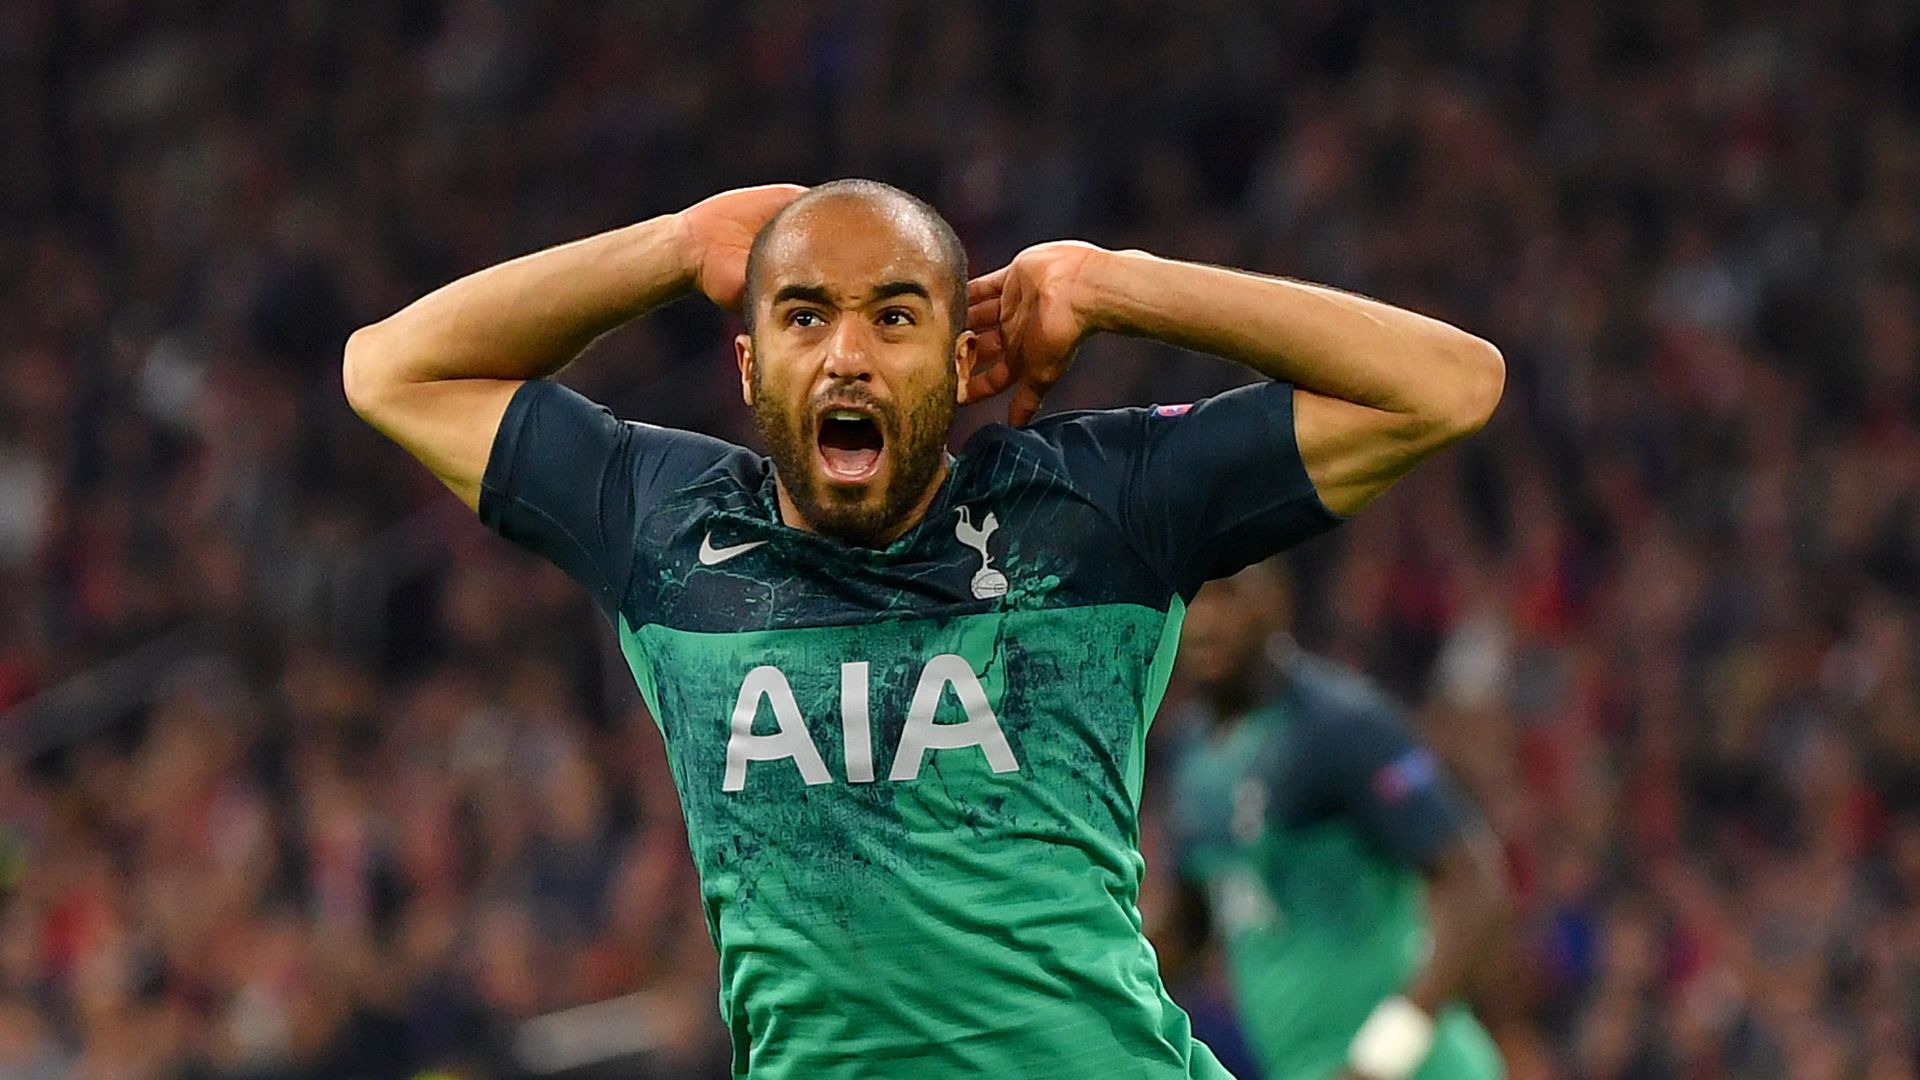 A year ago: Last-gasp Lucas sends Spurs to final